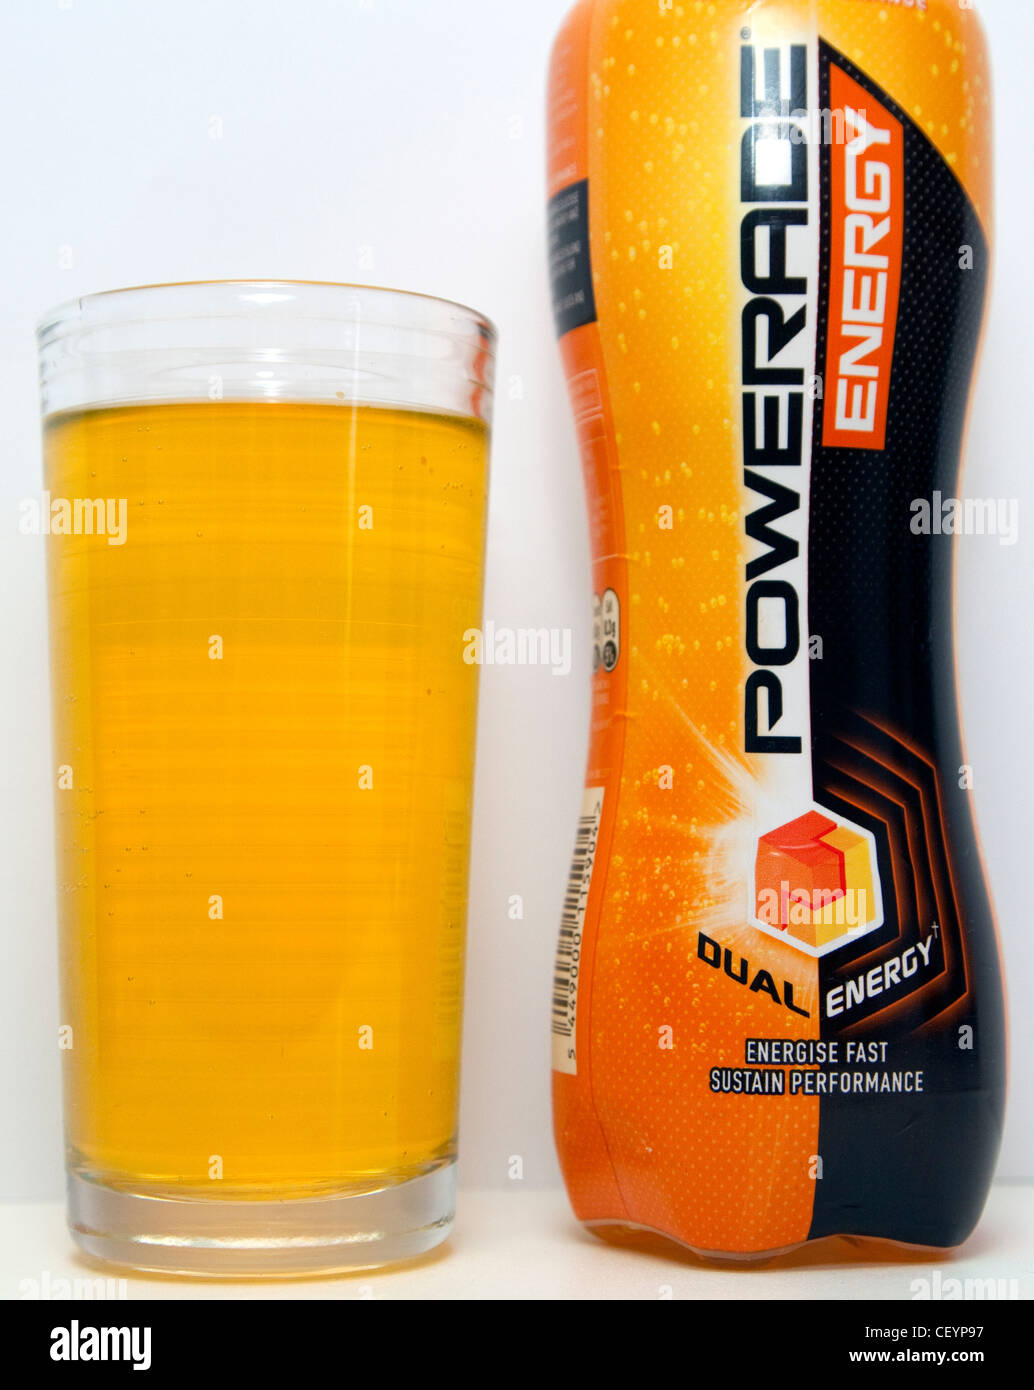 Powerade bottle hi-res stock photography and images - Alamy